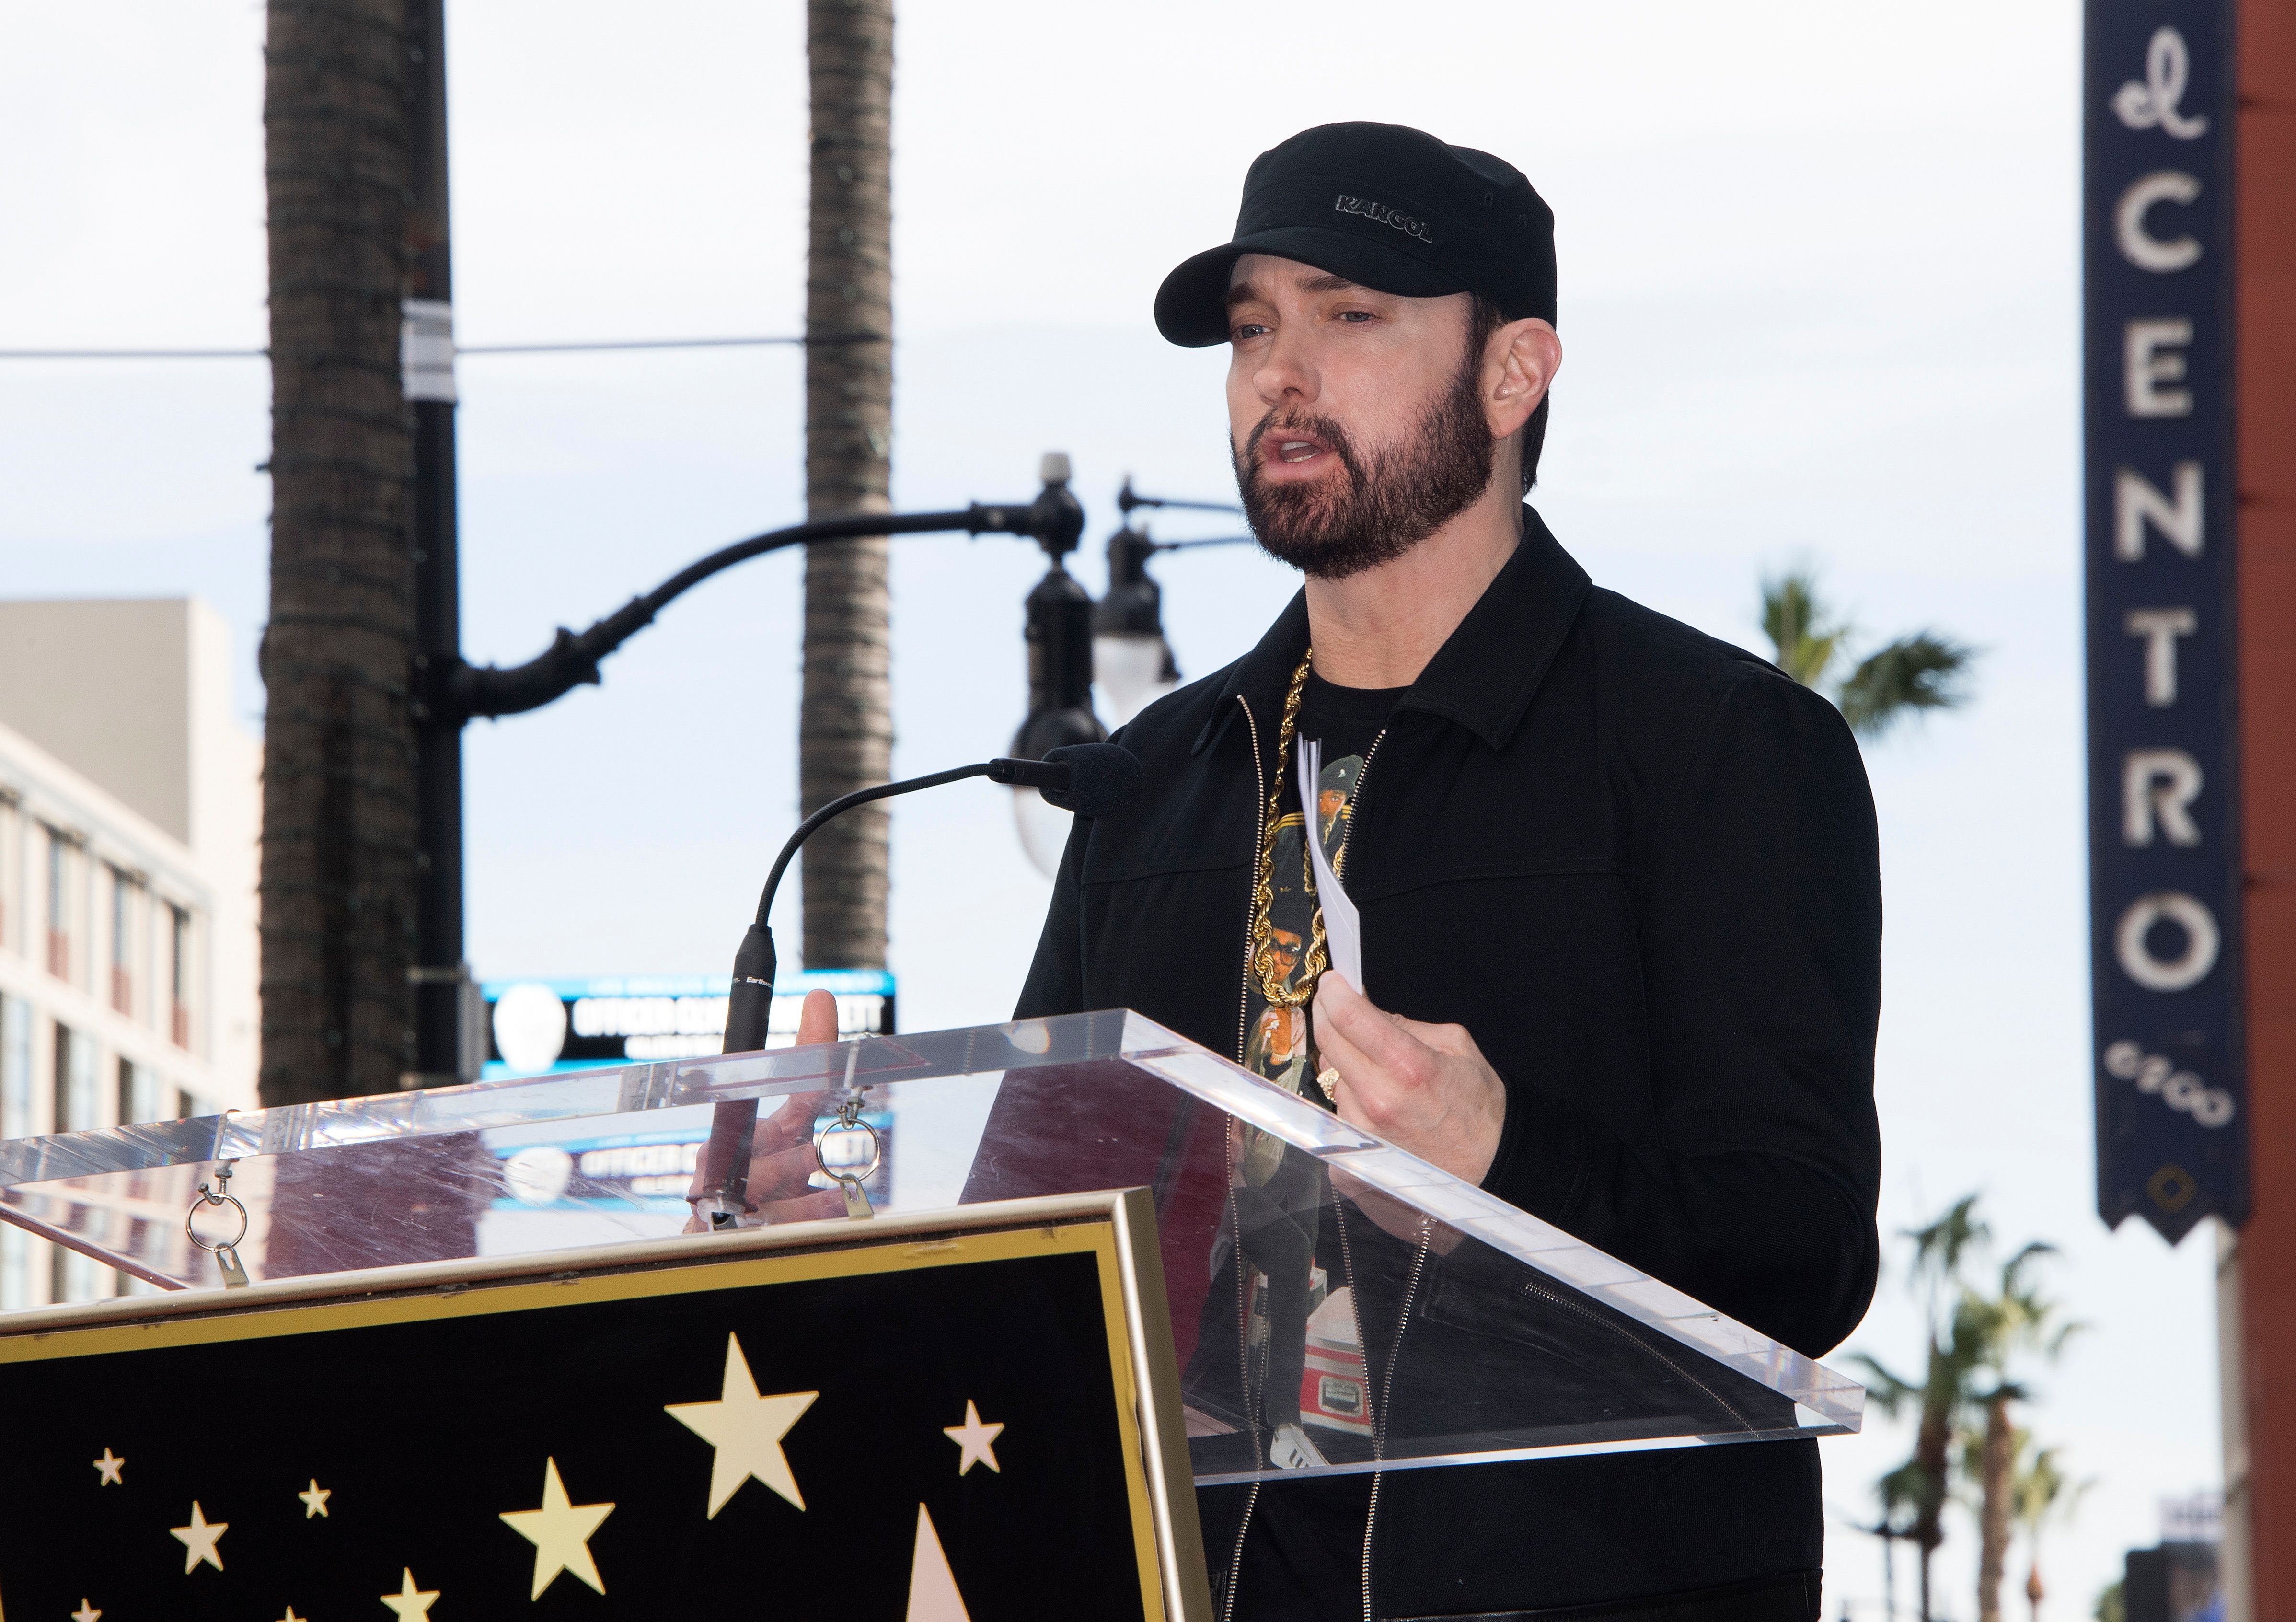 Eminem during the ceremony honoring 50 Cent with a Star on The Hollywood Walk of Fame in Hollywood, California on January 30, 2020 | Source: Getty Images